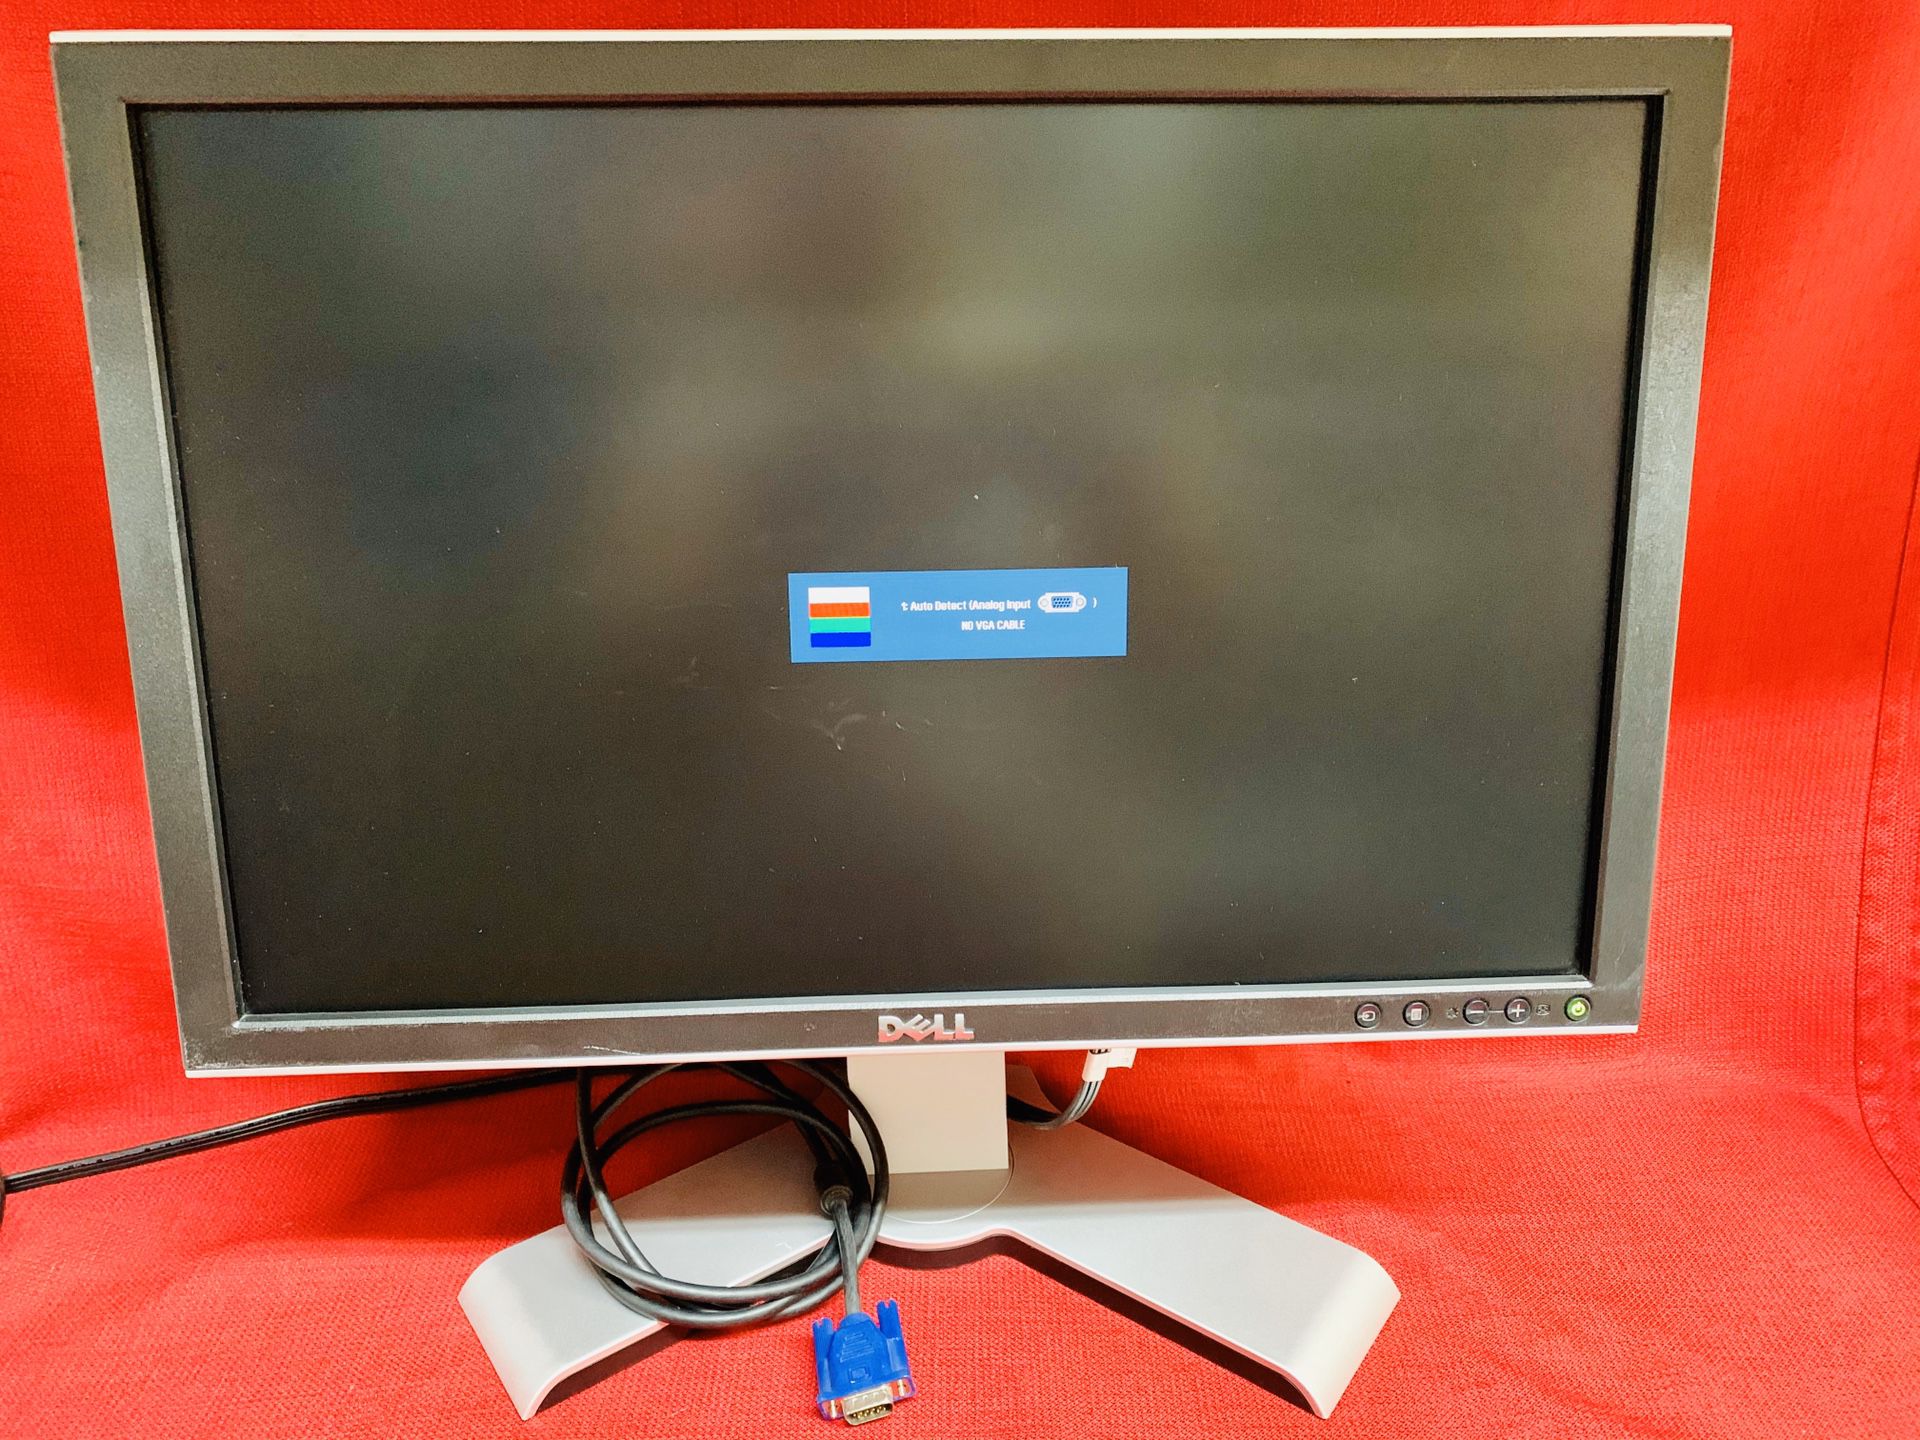 Dell 2009Wt 20" Flat Panel Widescreen LCD Computer Display Monitor Adjustable